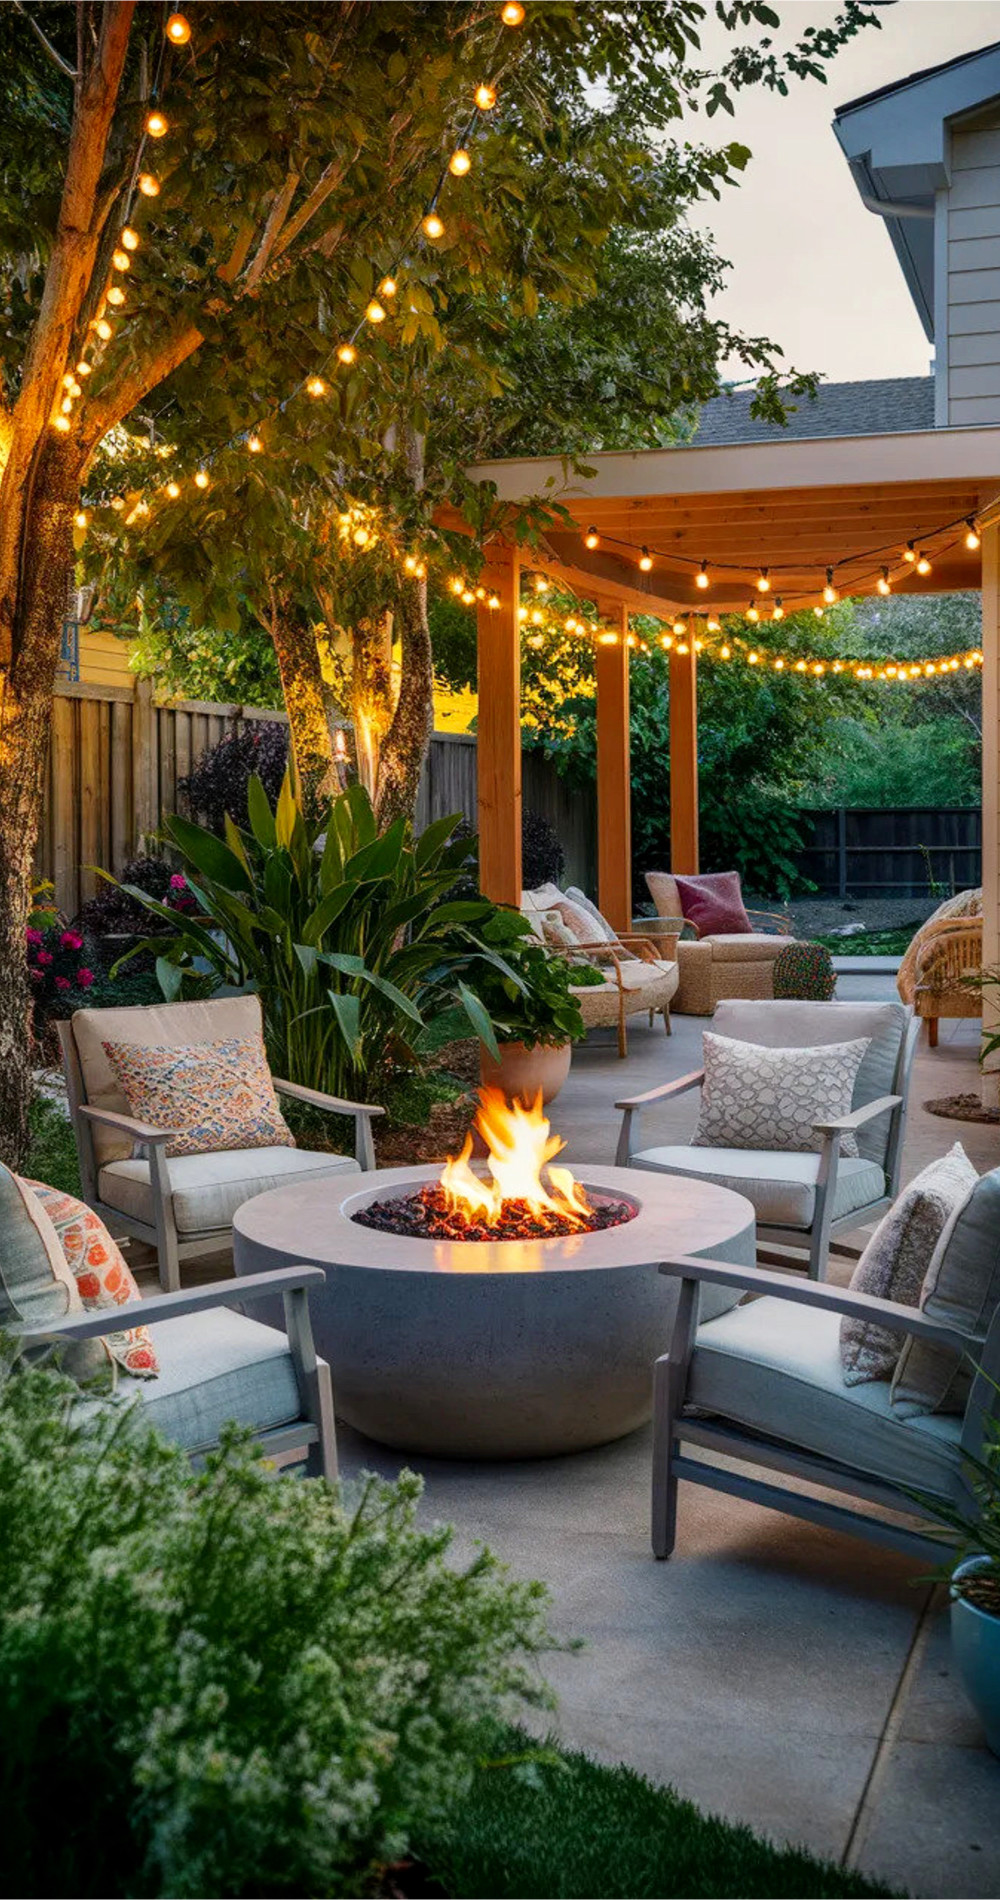 Backyard patio with fire pit area